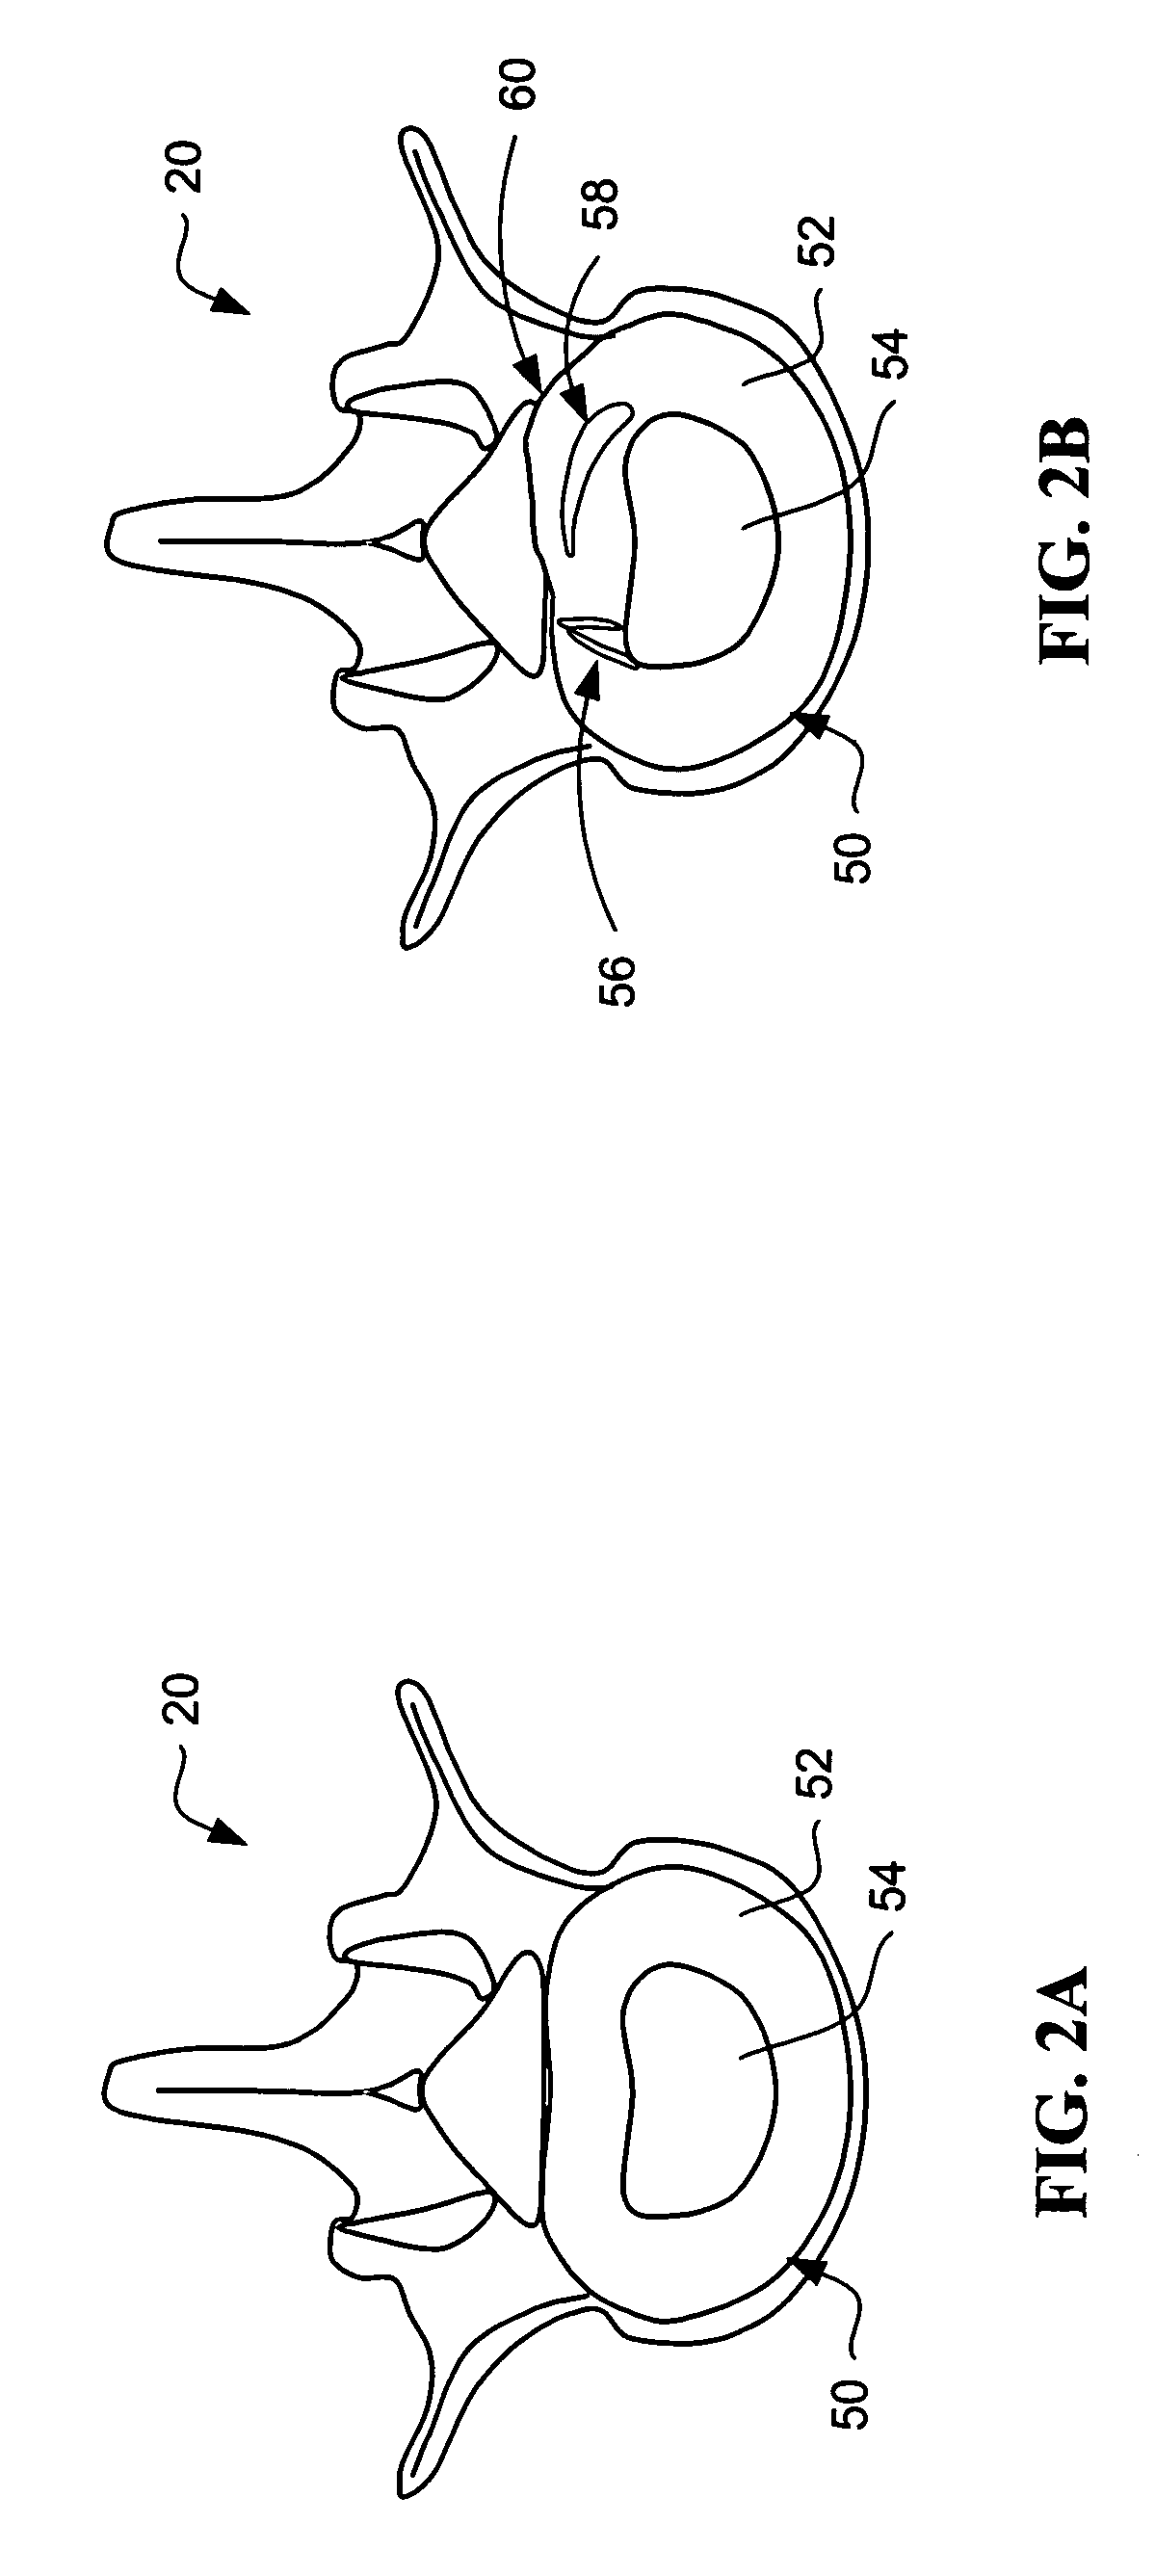 Devices and methods for annular repair of intervertebral discs